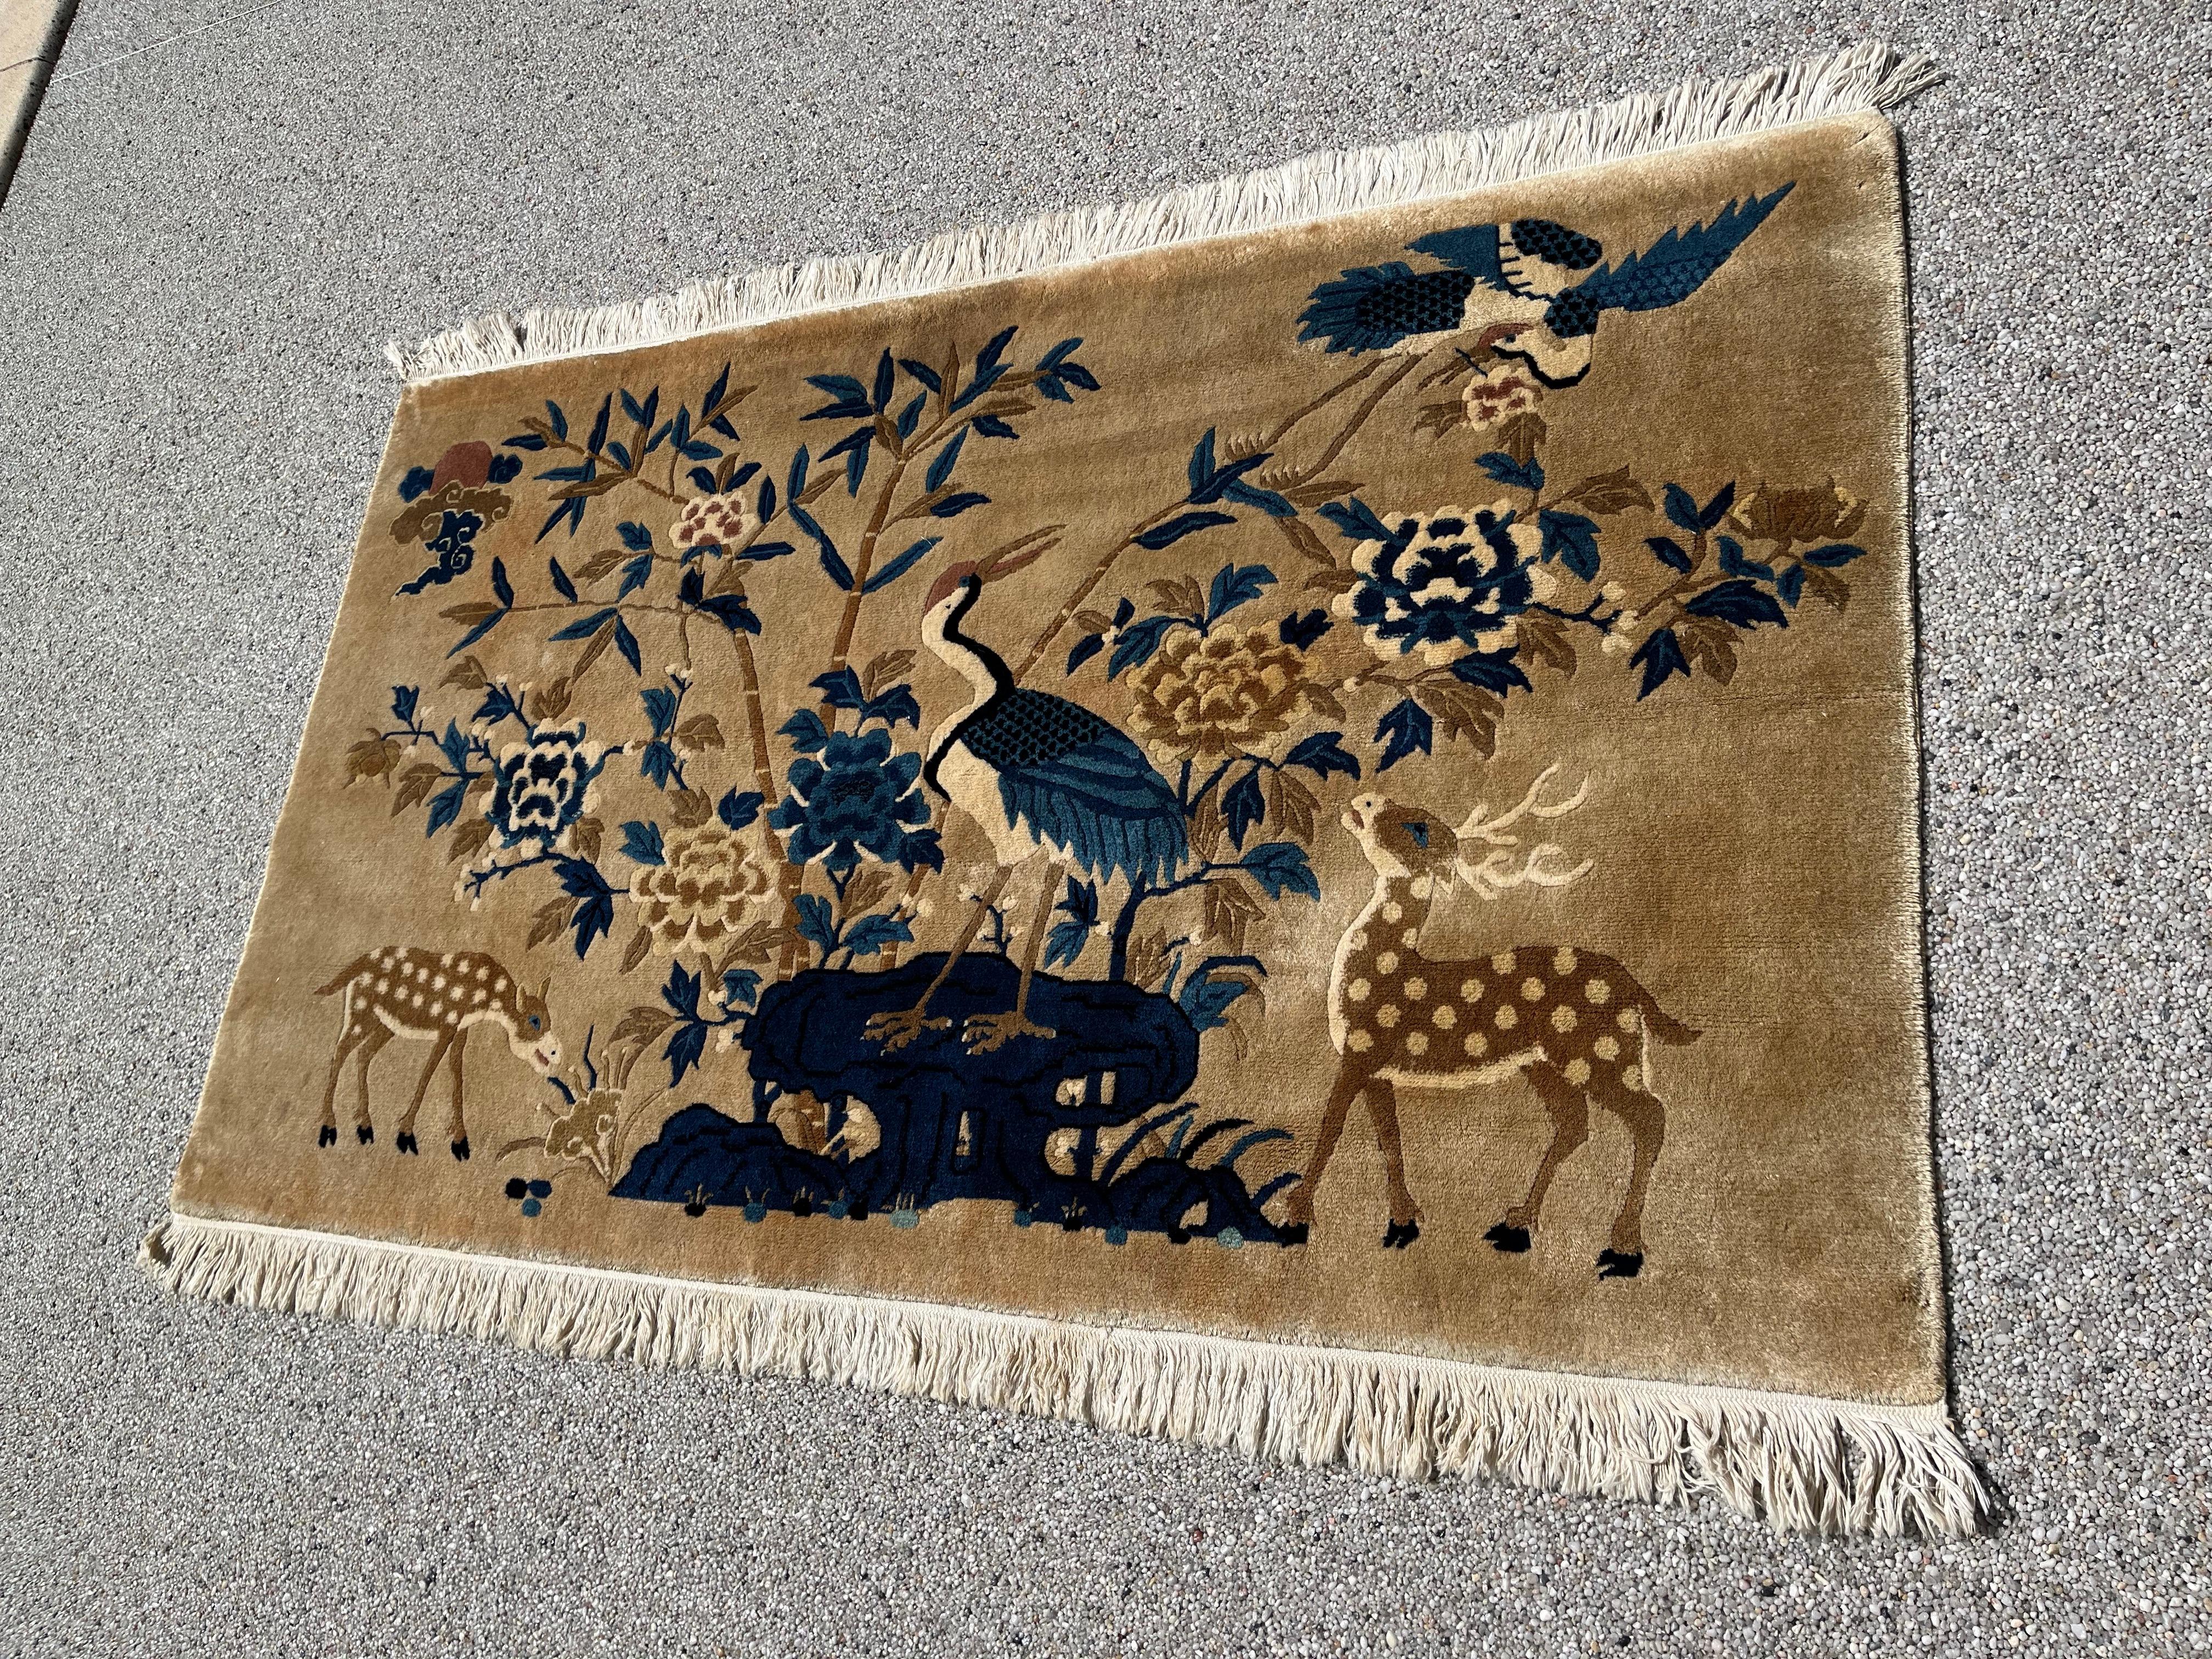 Chinese rug, Beijing Early 20th century, China.

Pretty little Beijing rug from the 20th century called 